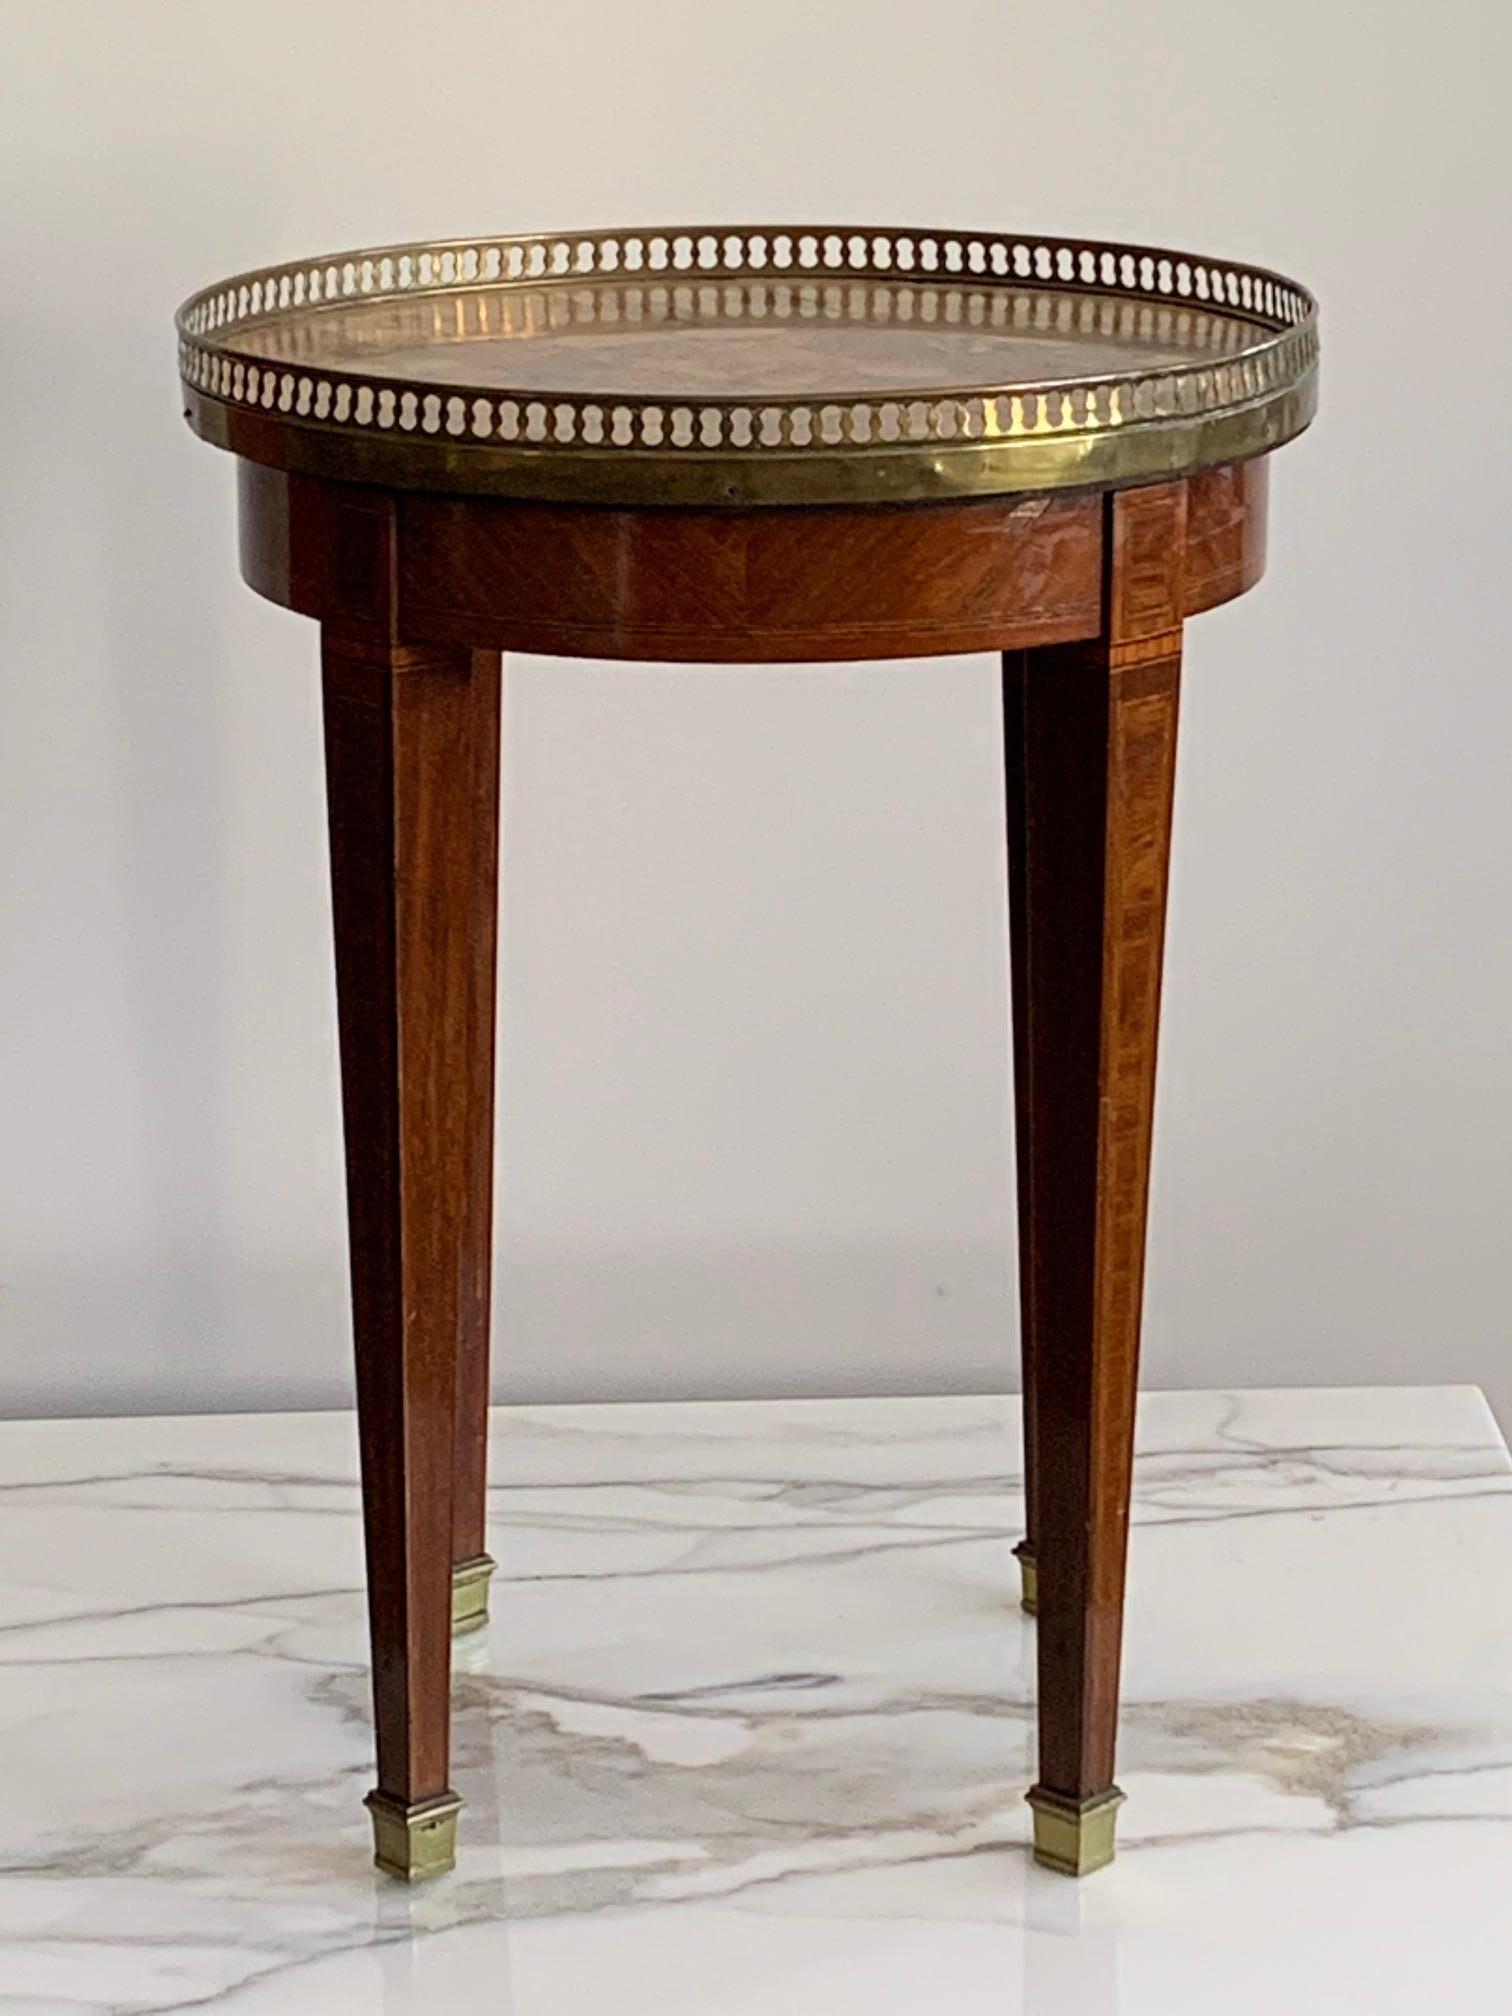 A charming and elegant French bouilotte table with beautiful marble top, brass gallery, tapering legs with inlays and brass sabots. Interesting provenance and history.